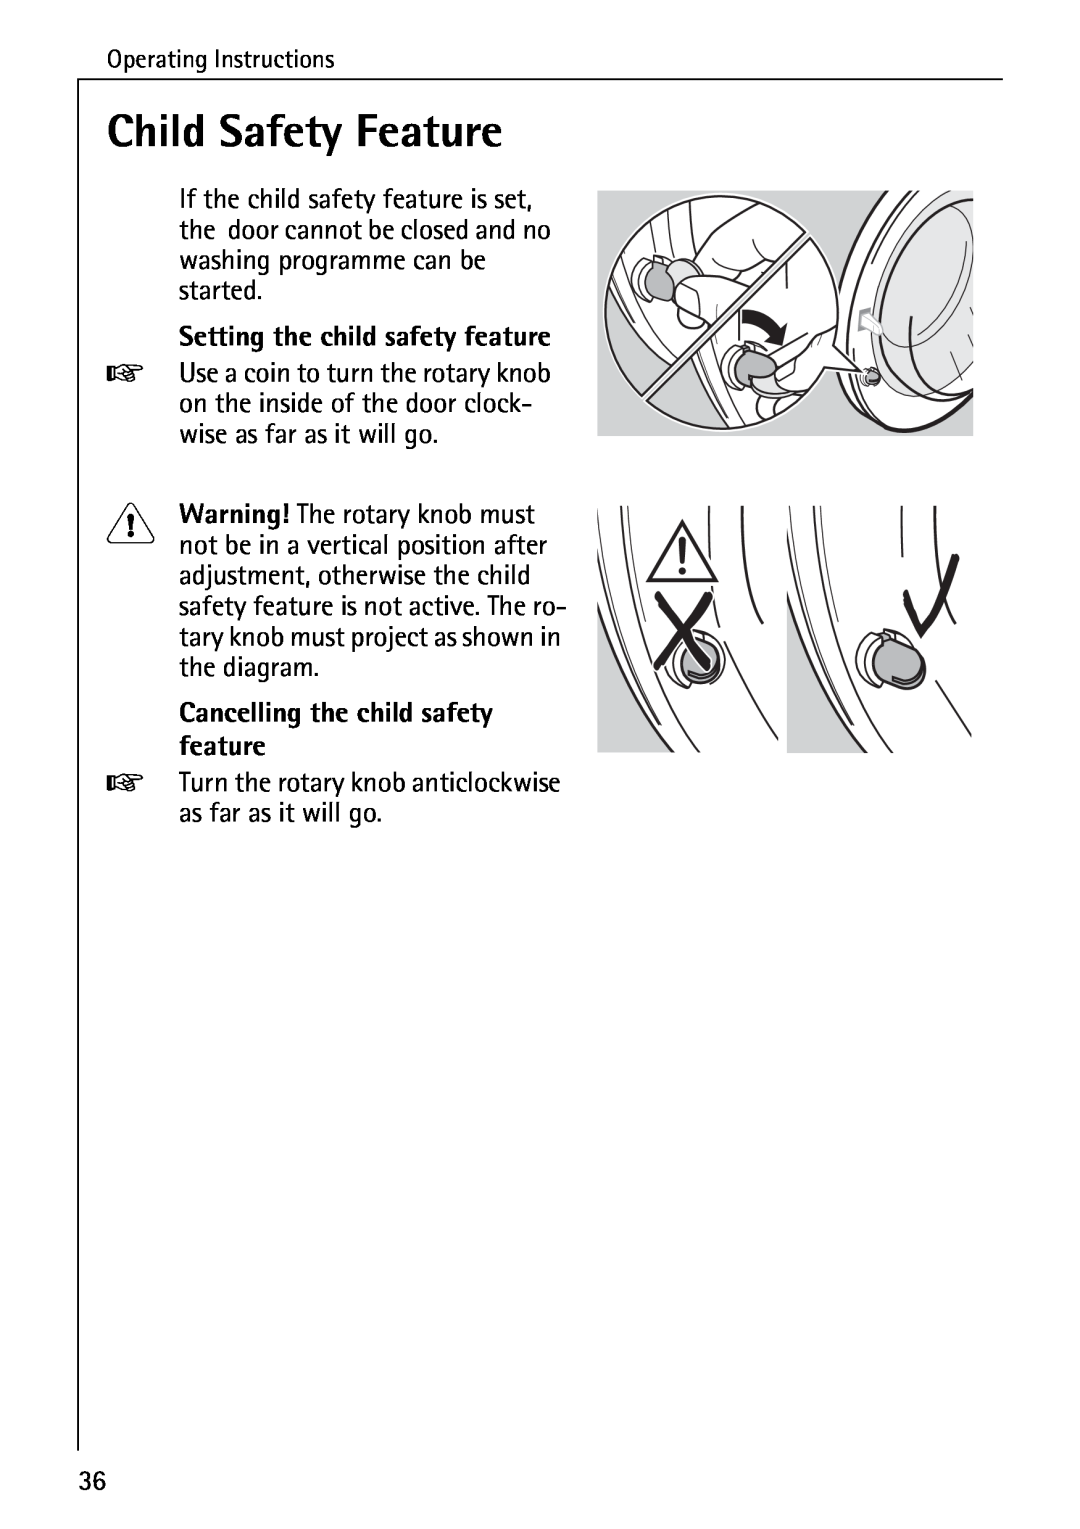 Electrolux LAVAMAT W 1259 Child Safety Feature, Setting the child safety feature, Cancelling the child safety feature 